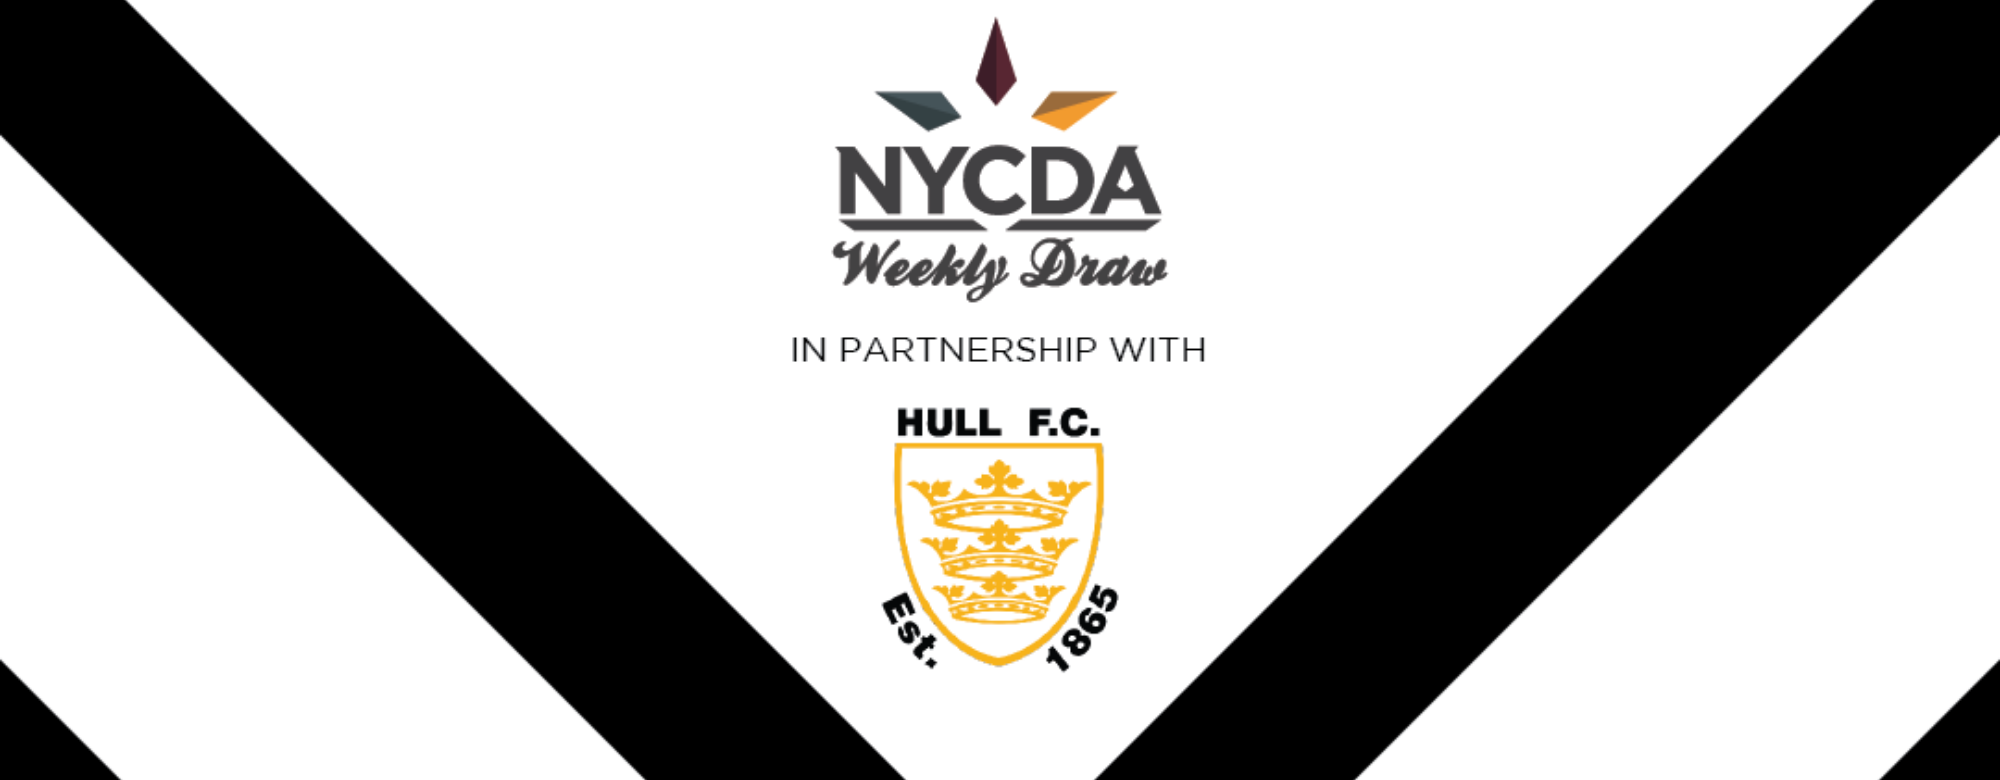 Join NCYDA Lottery To Support Centre of Excellence